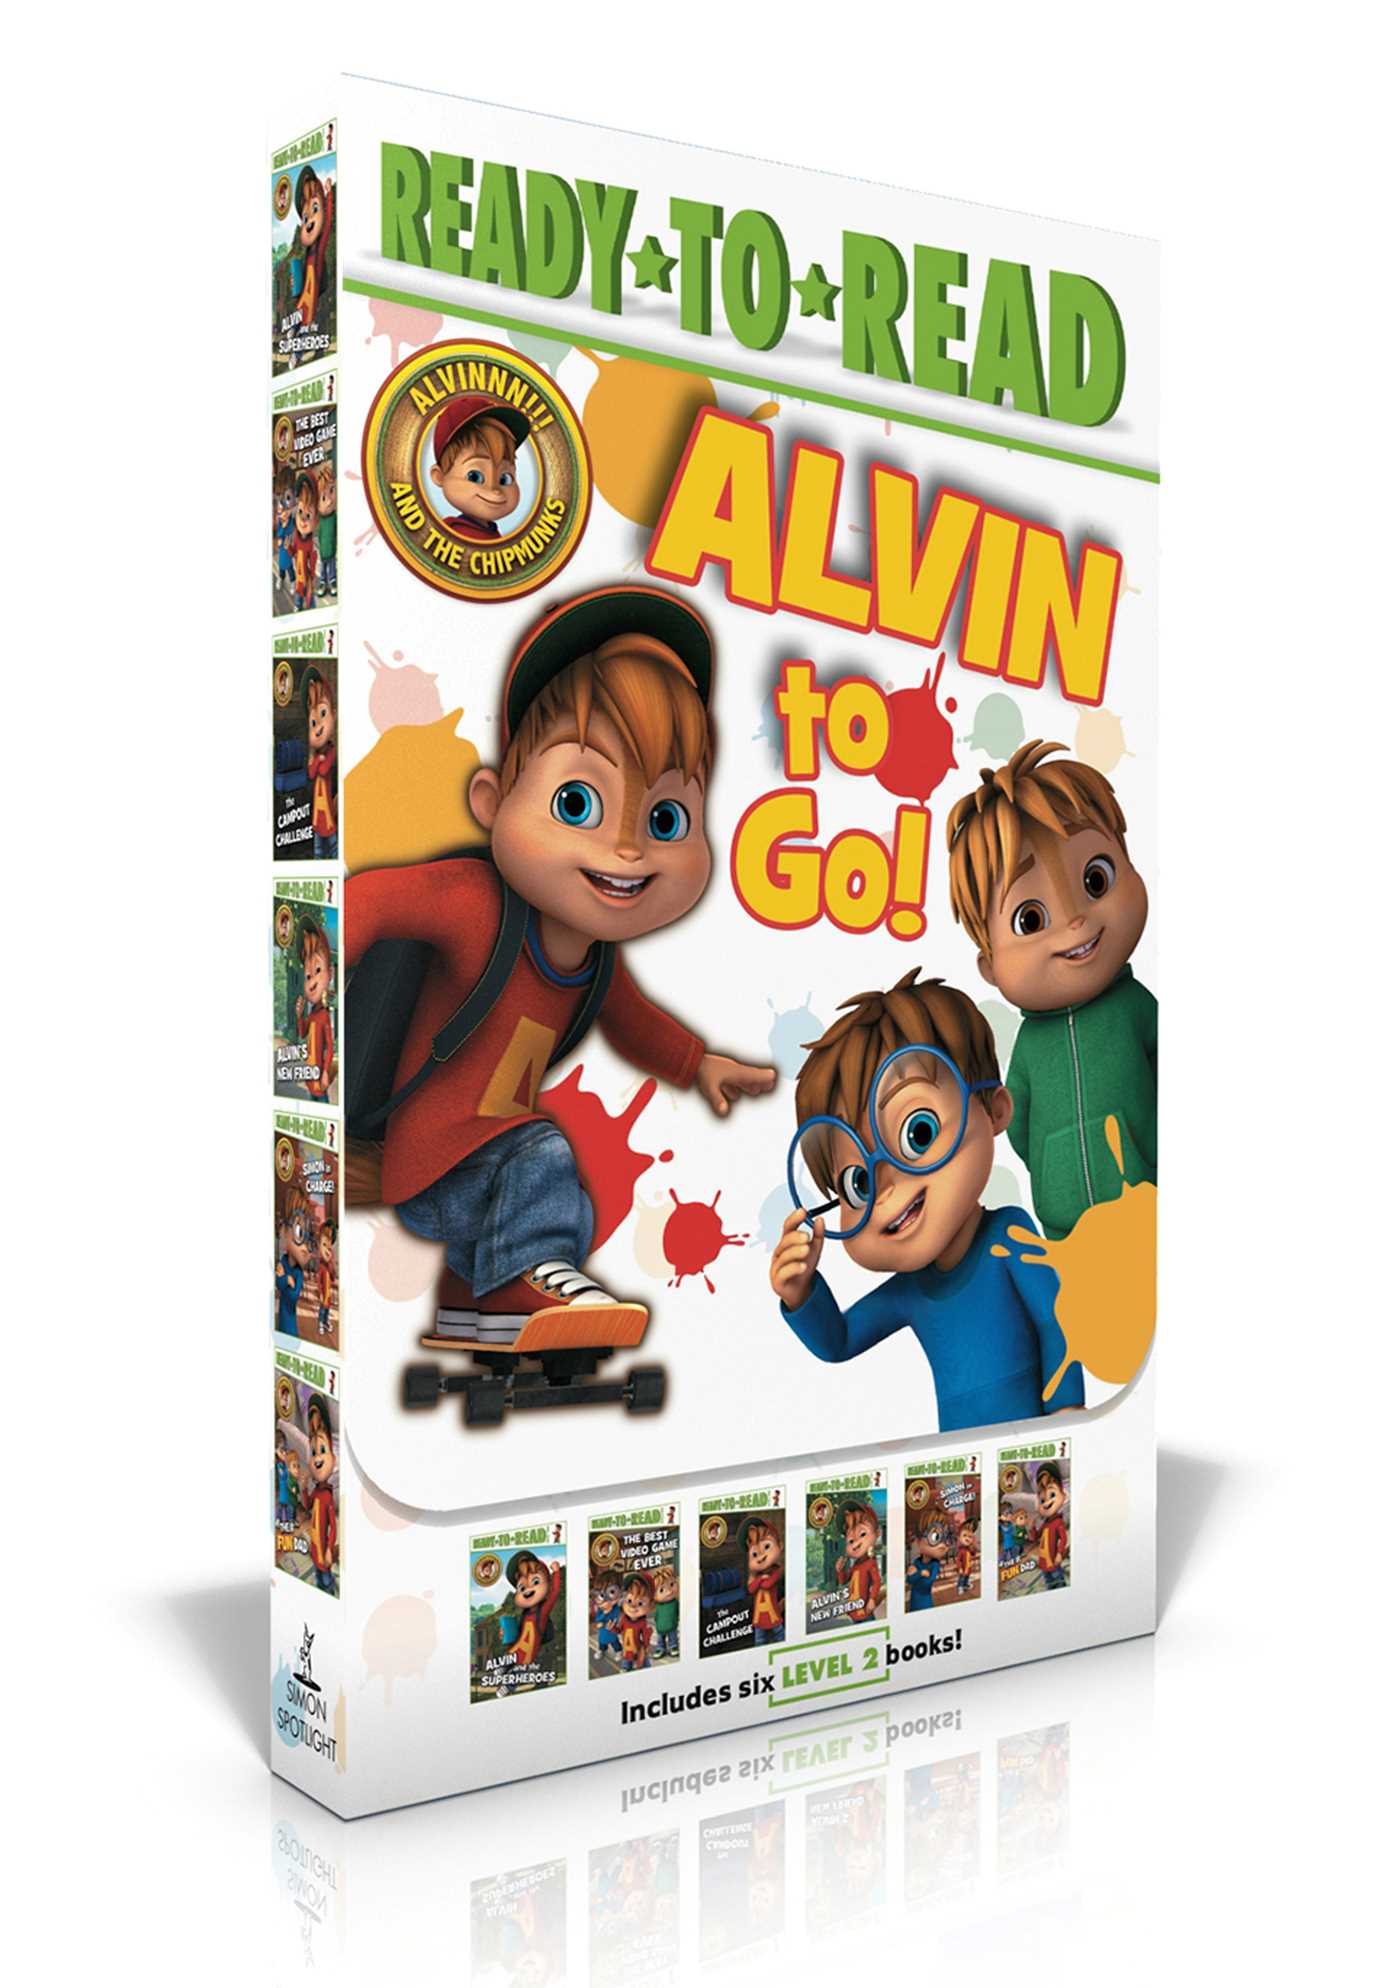 Alvin and the chipmunks superheroes